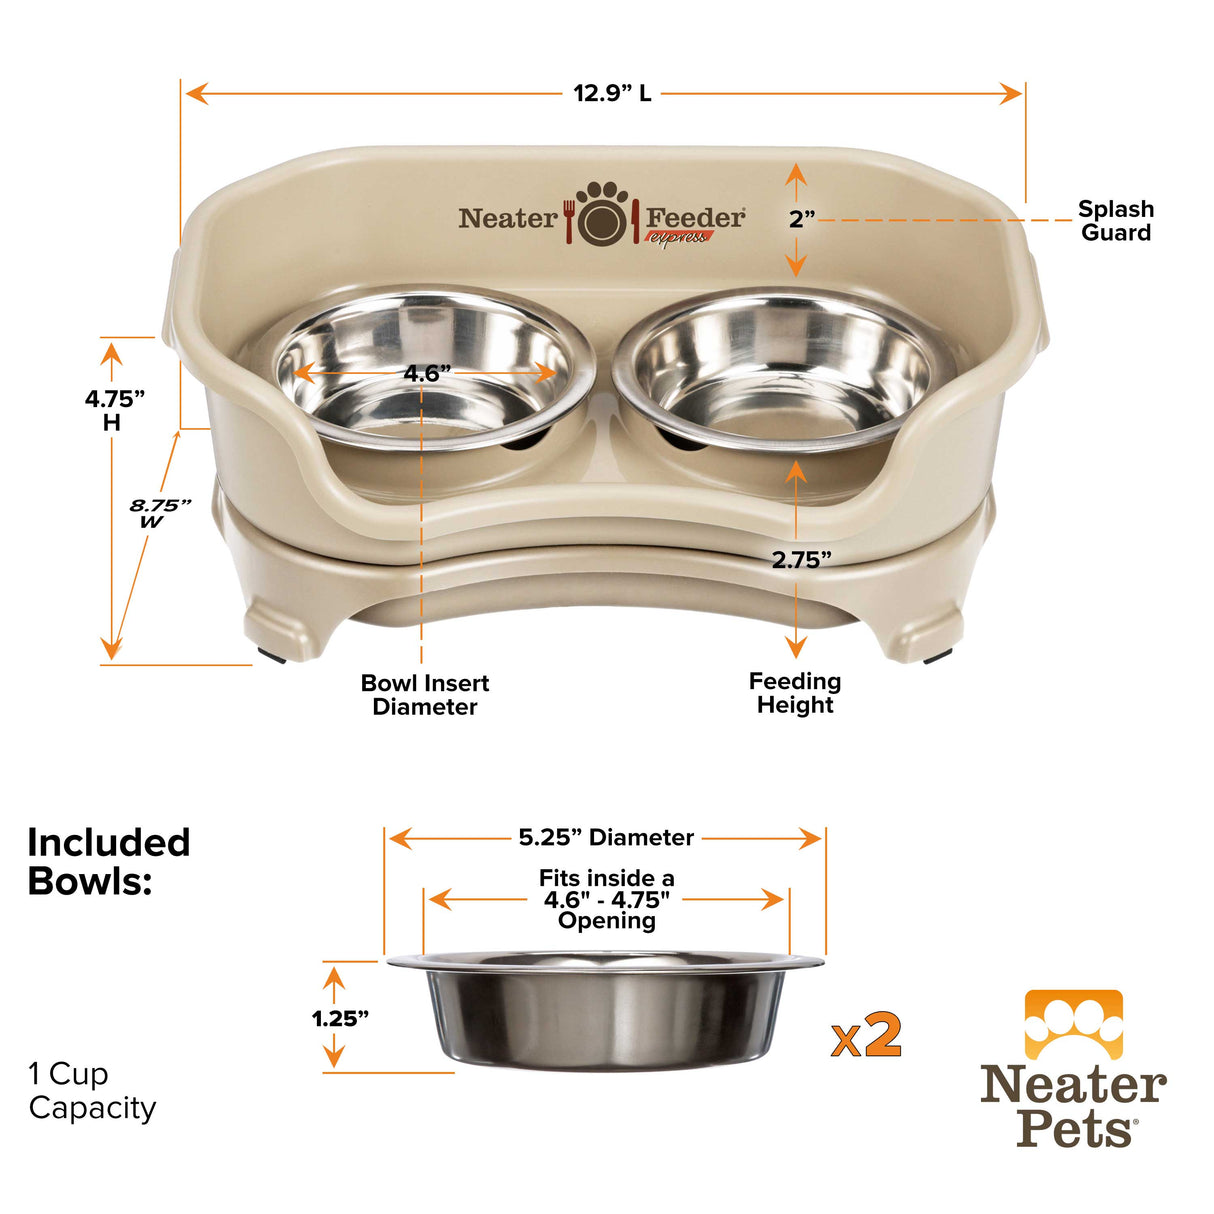 Express cat feeder and bowl dimensions